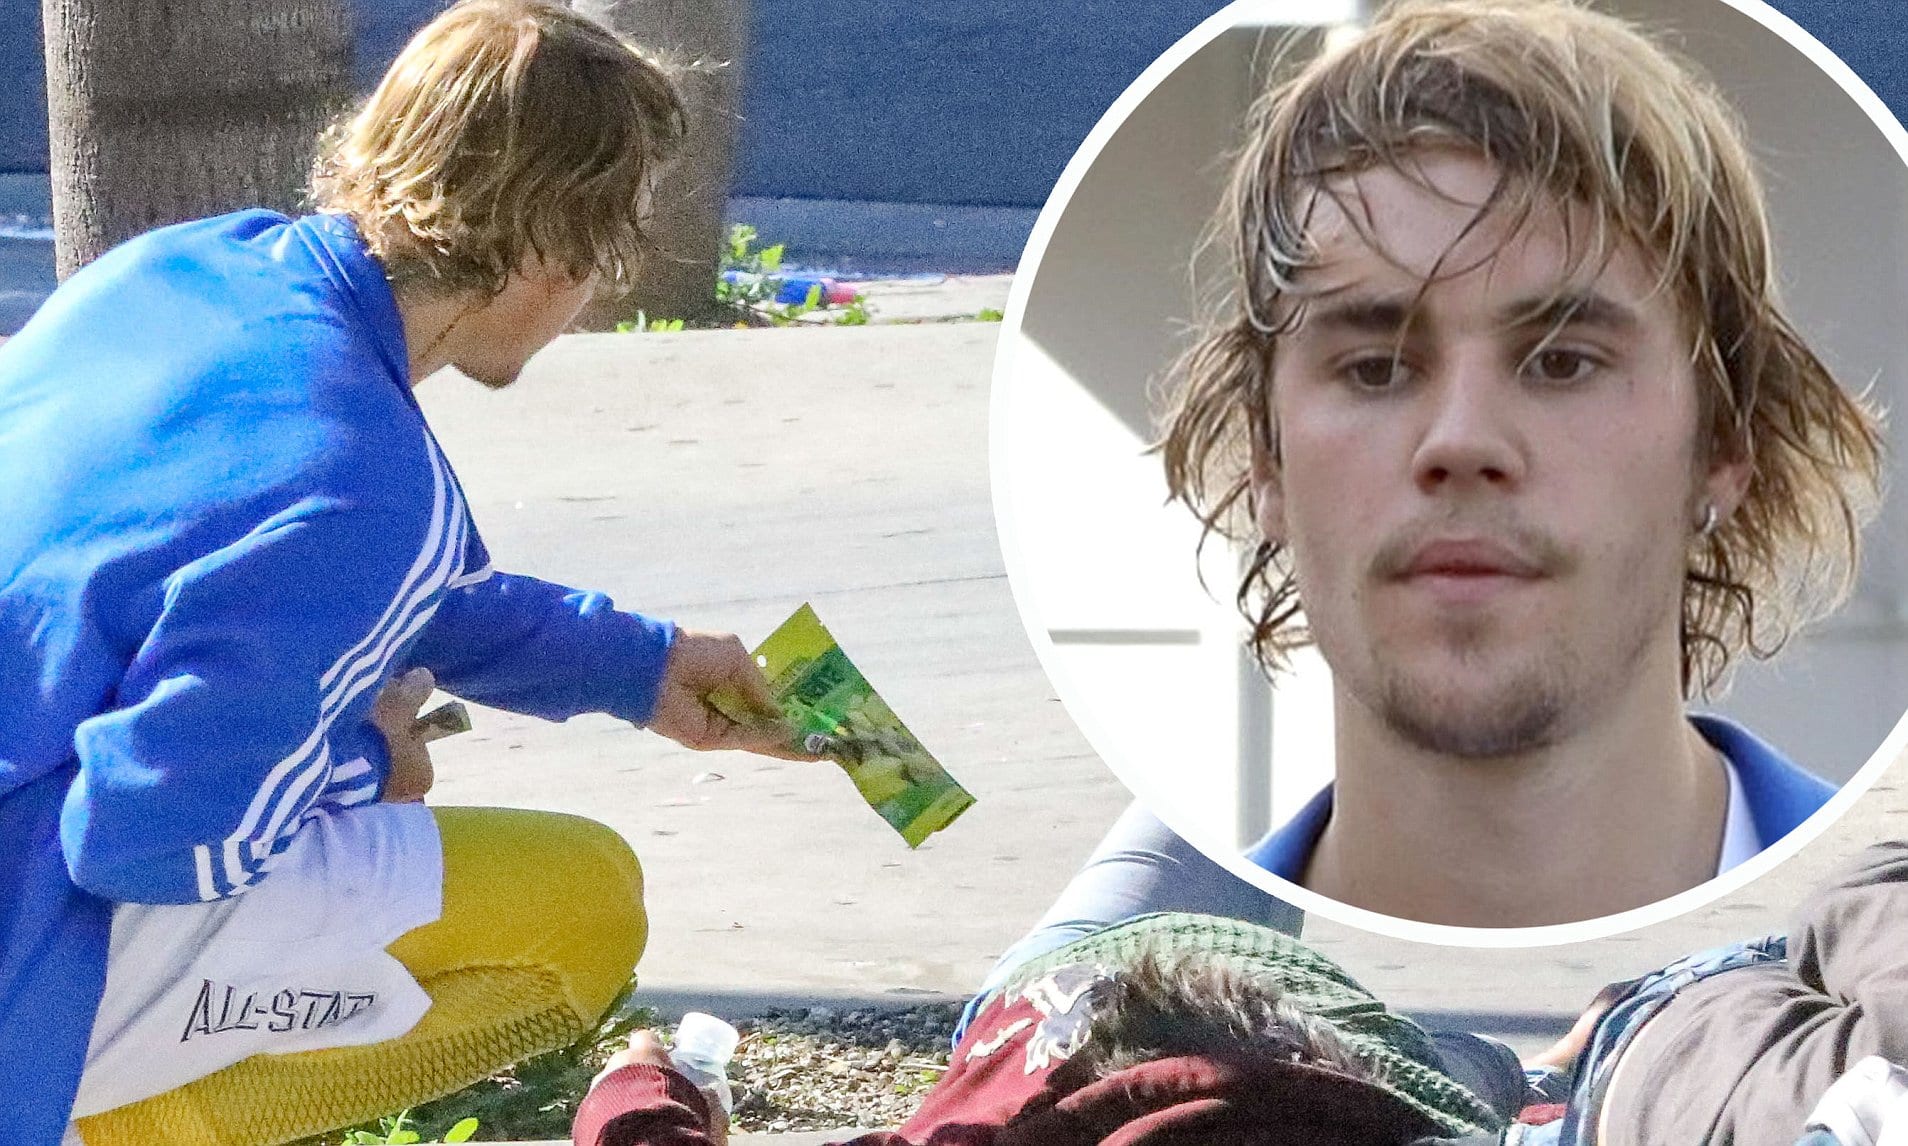 Justin Bieber Gives Homeless Couple Food and Water